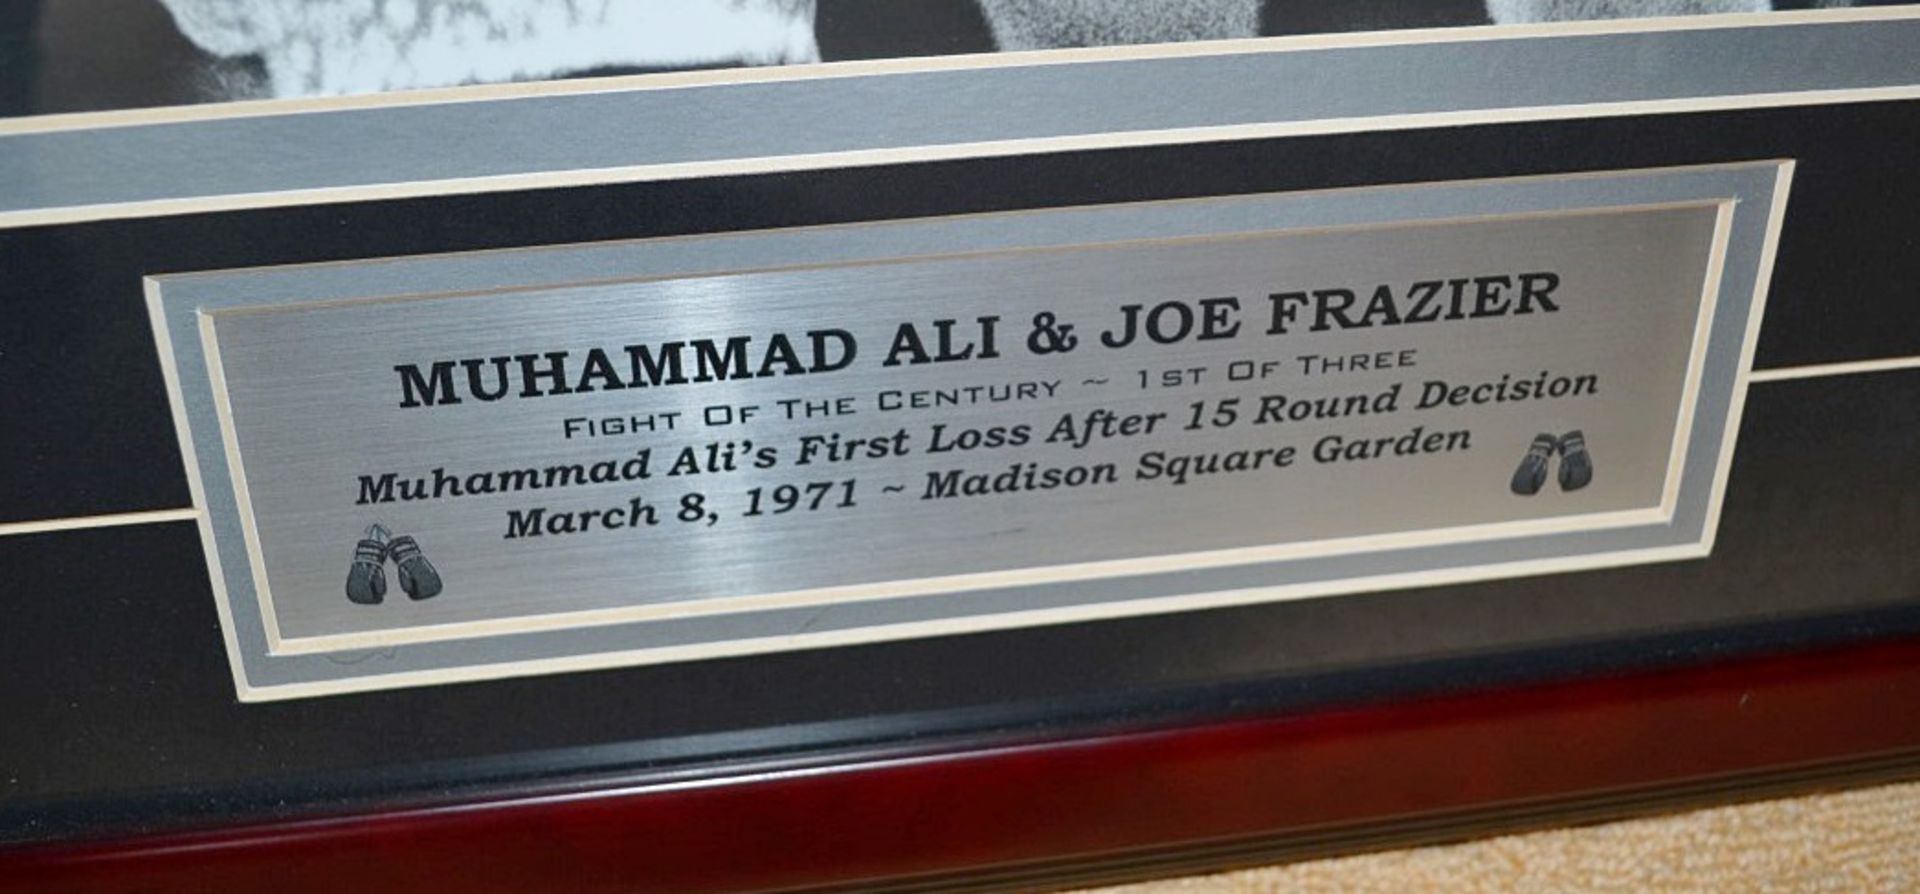 1 x Signed Framed Photograph Of MUHAMMAD ALI & JOE FRAZIER - Hand Signed By Joe frazier - - Image 2 of 5